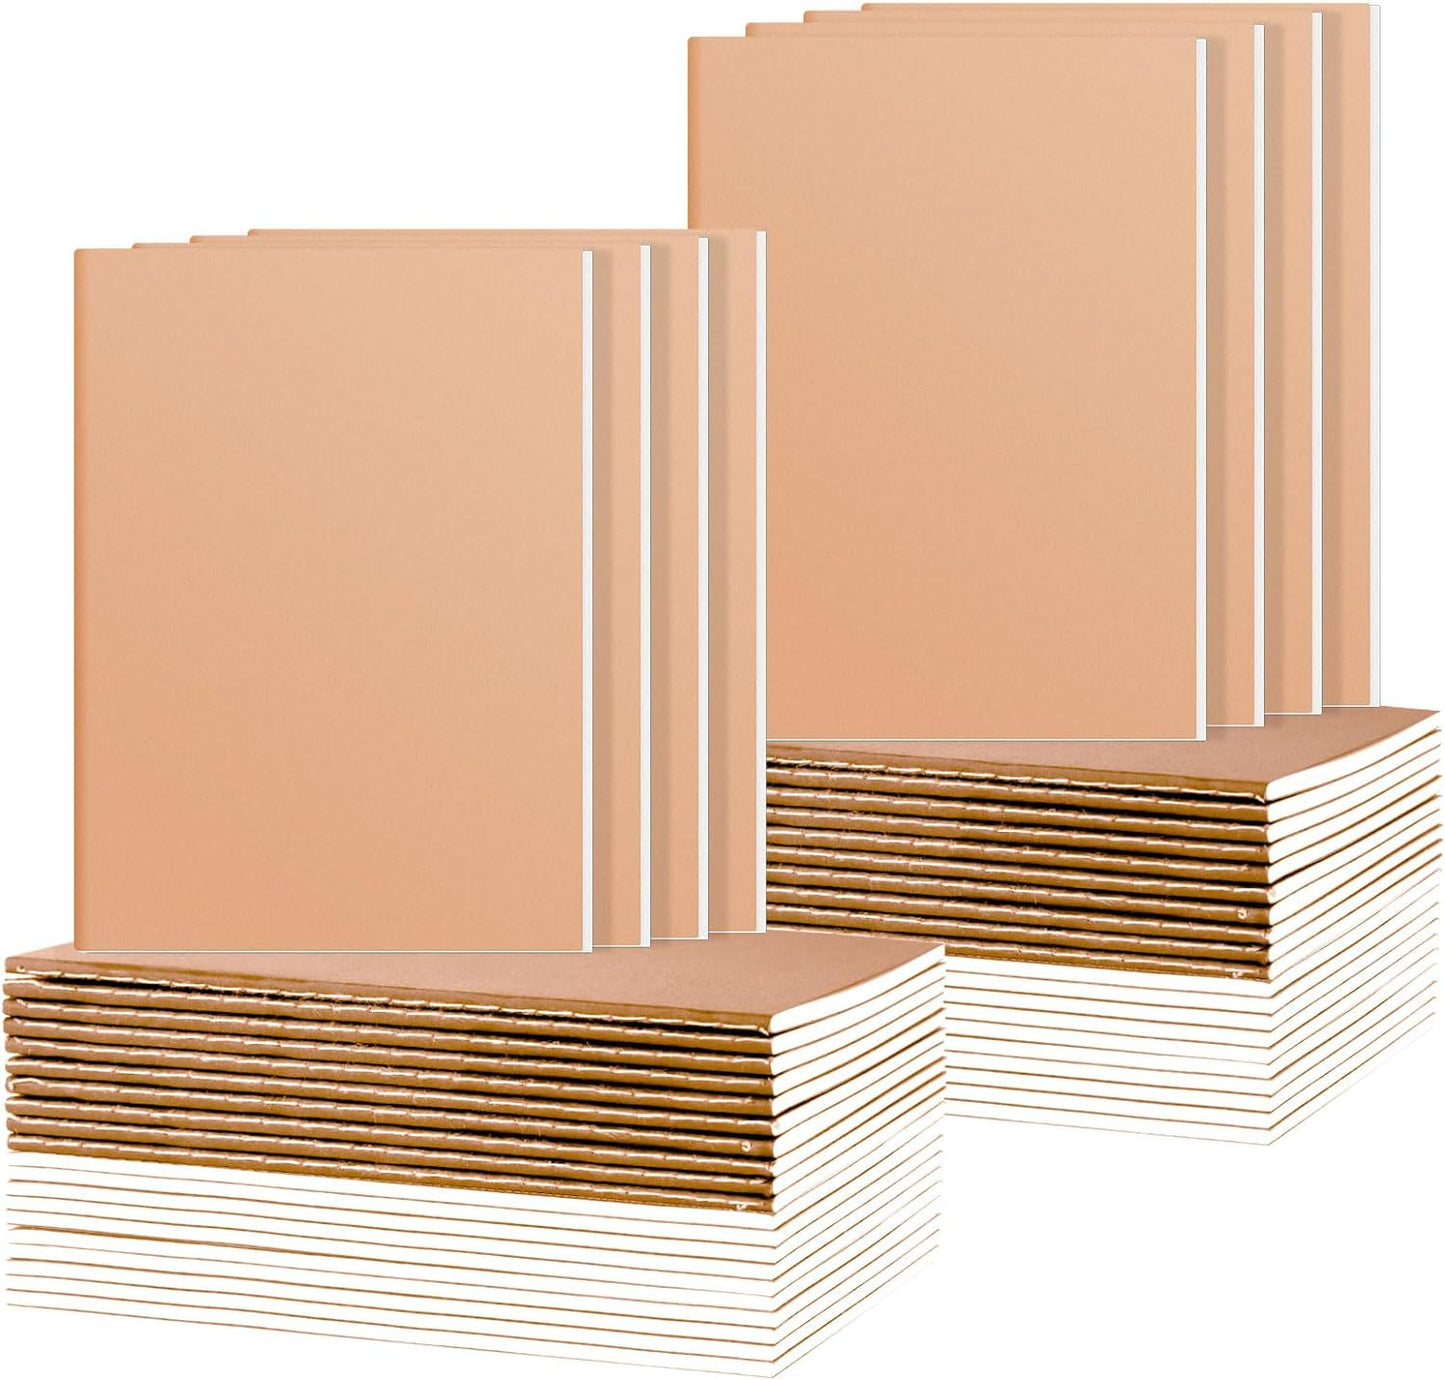 48 Pack A5 Kraft Notebooks, Journals in Bulk, Blank Paper Sketchbooks, 72 Pages, 36 Sheets, 80GSM, 8.3X5.5 Inch, Travel Writing Notebooks Journal for Office School Supplies